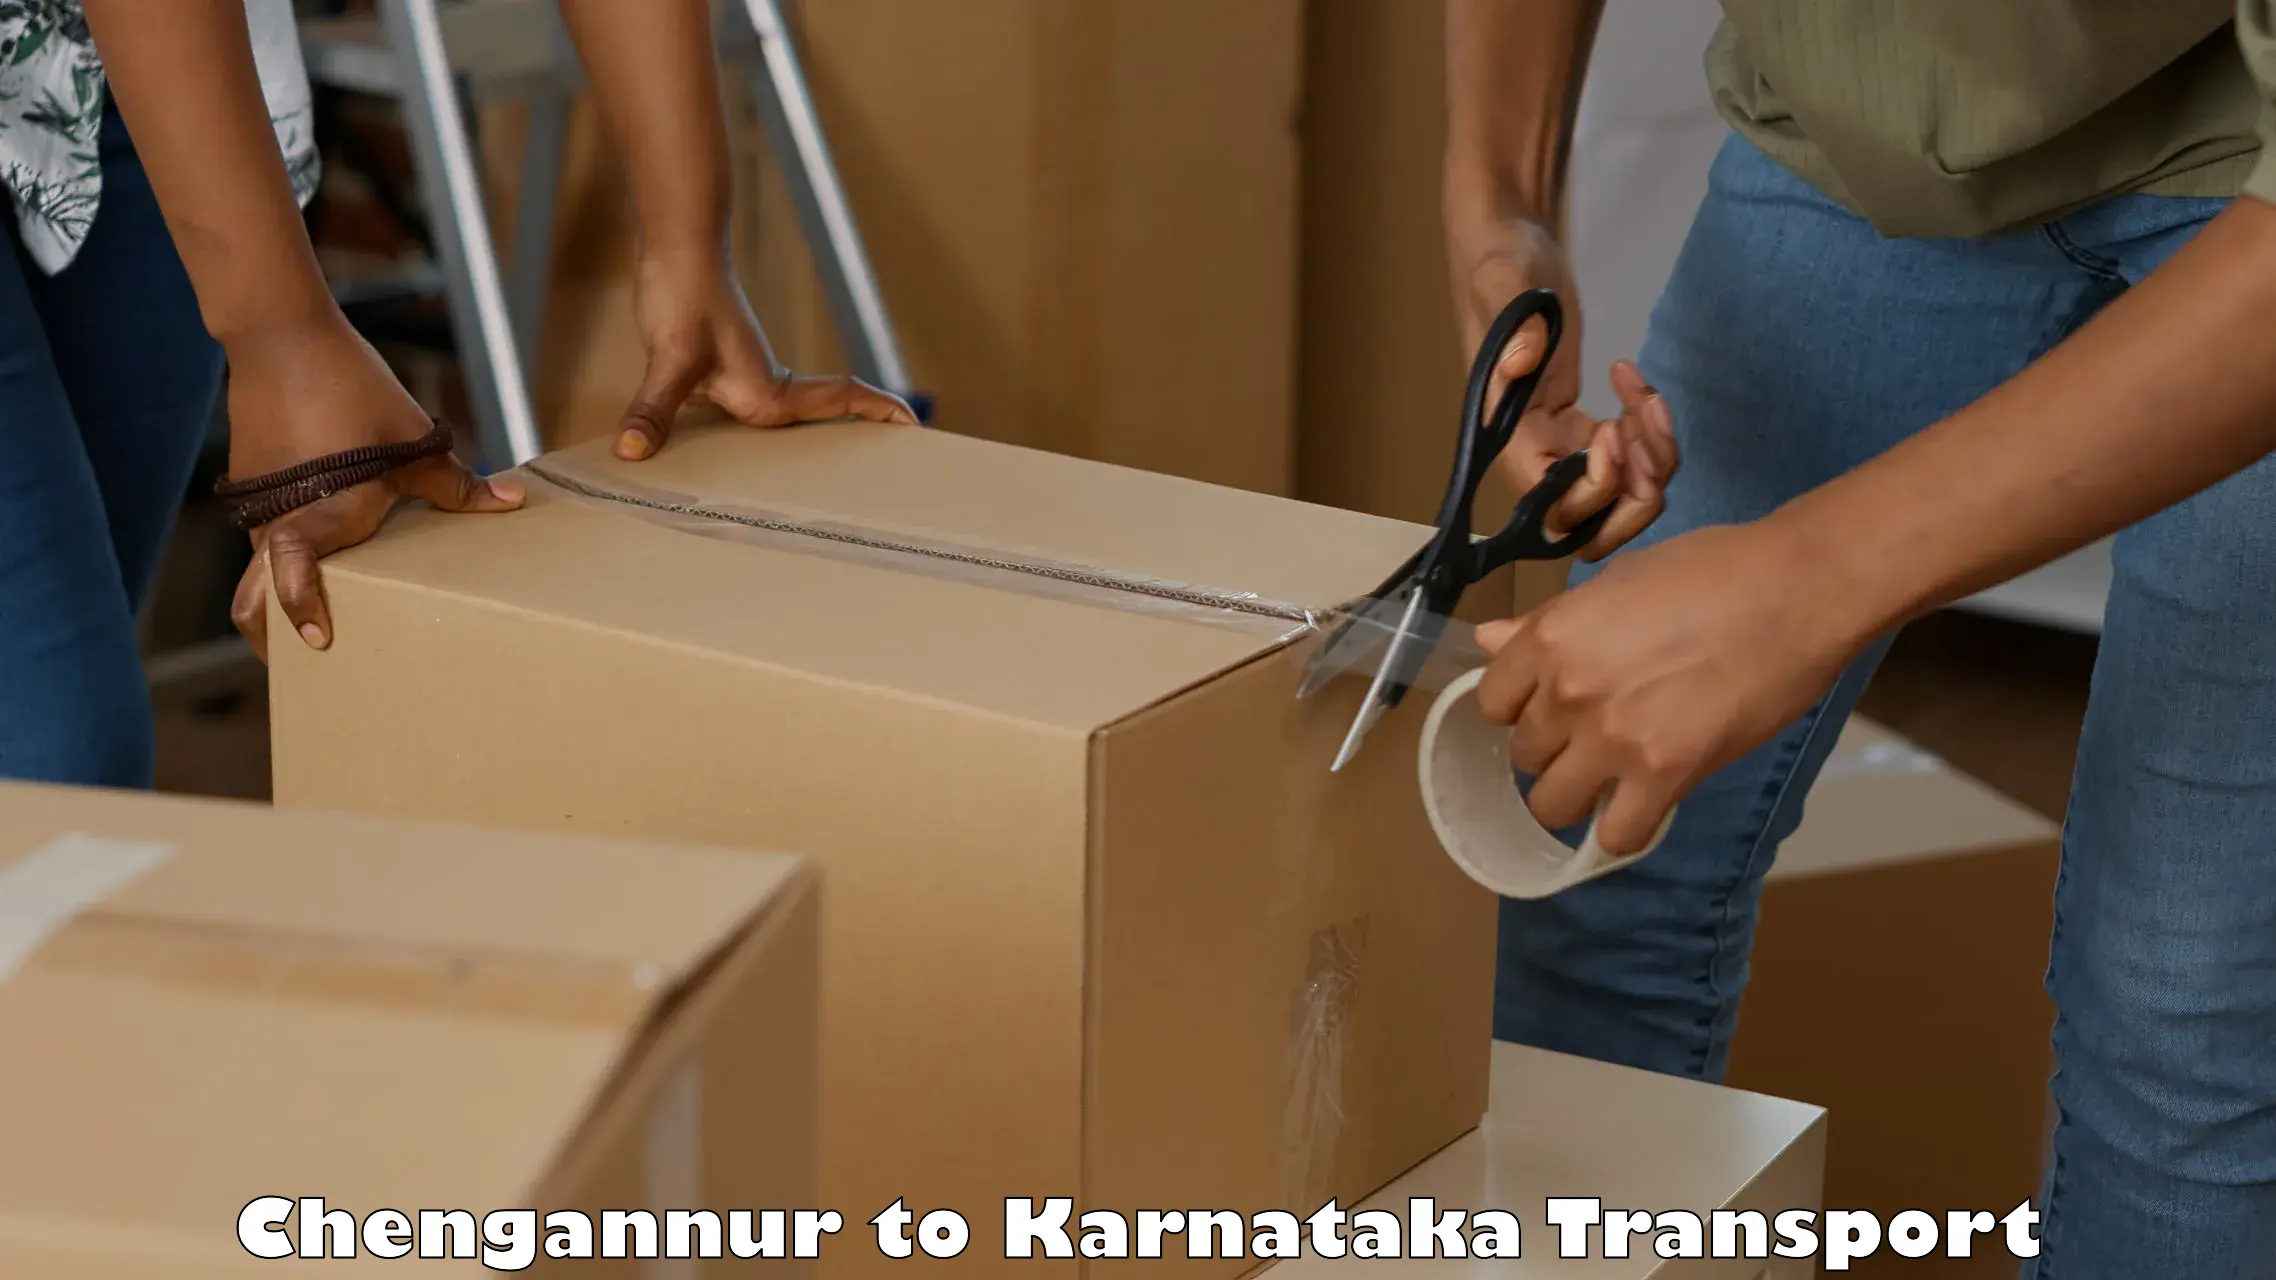 Domestic transport services Chengannur to Gurmatkal